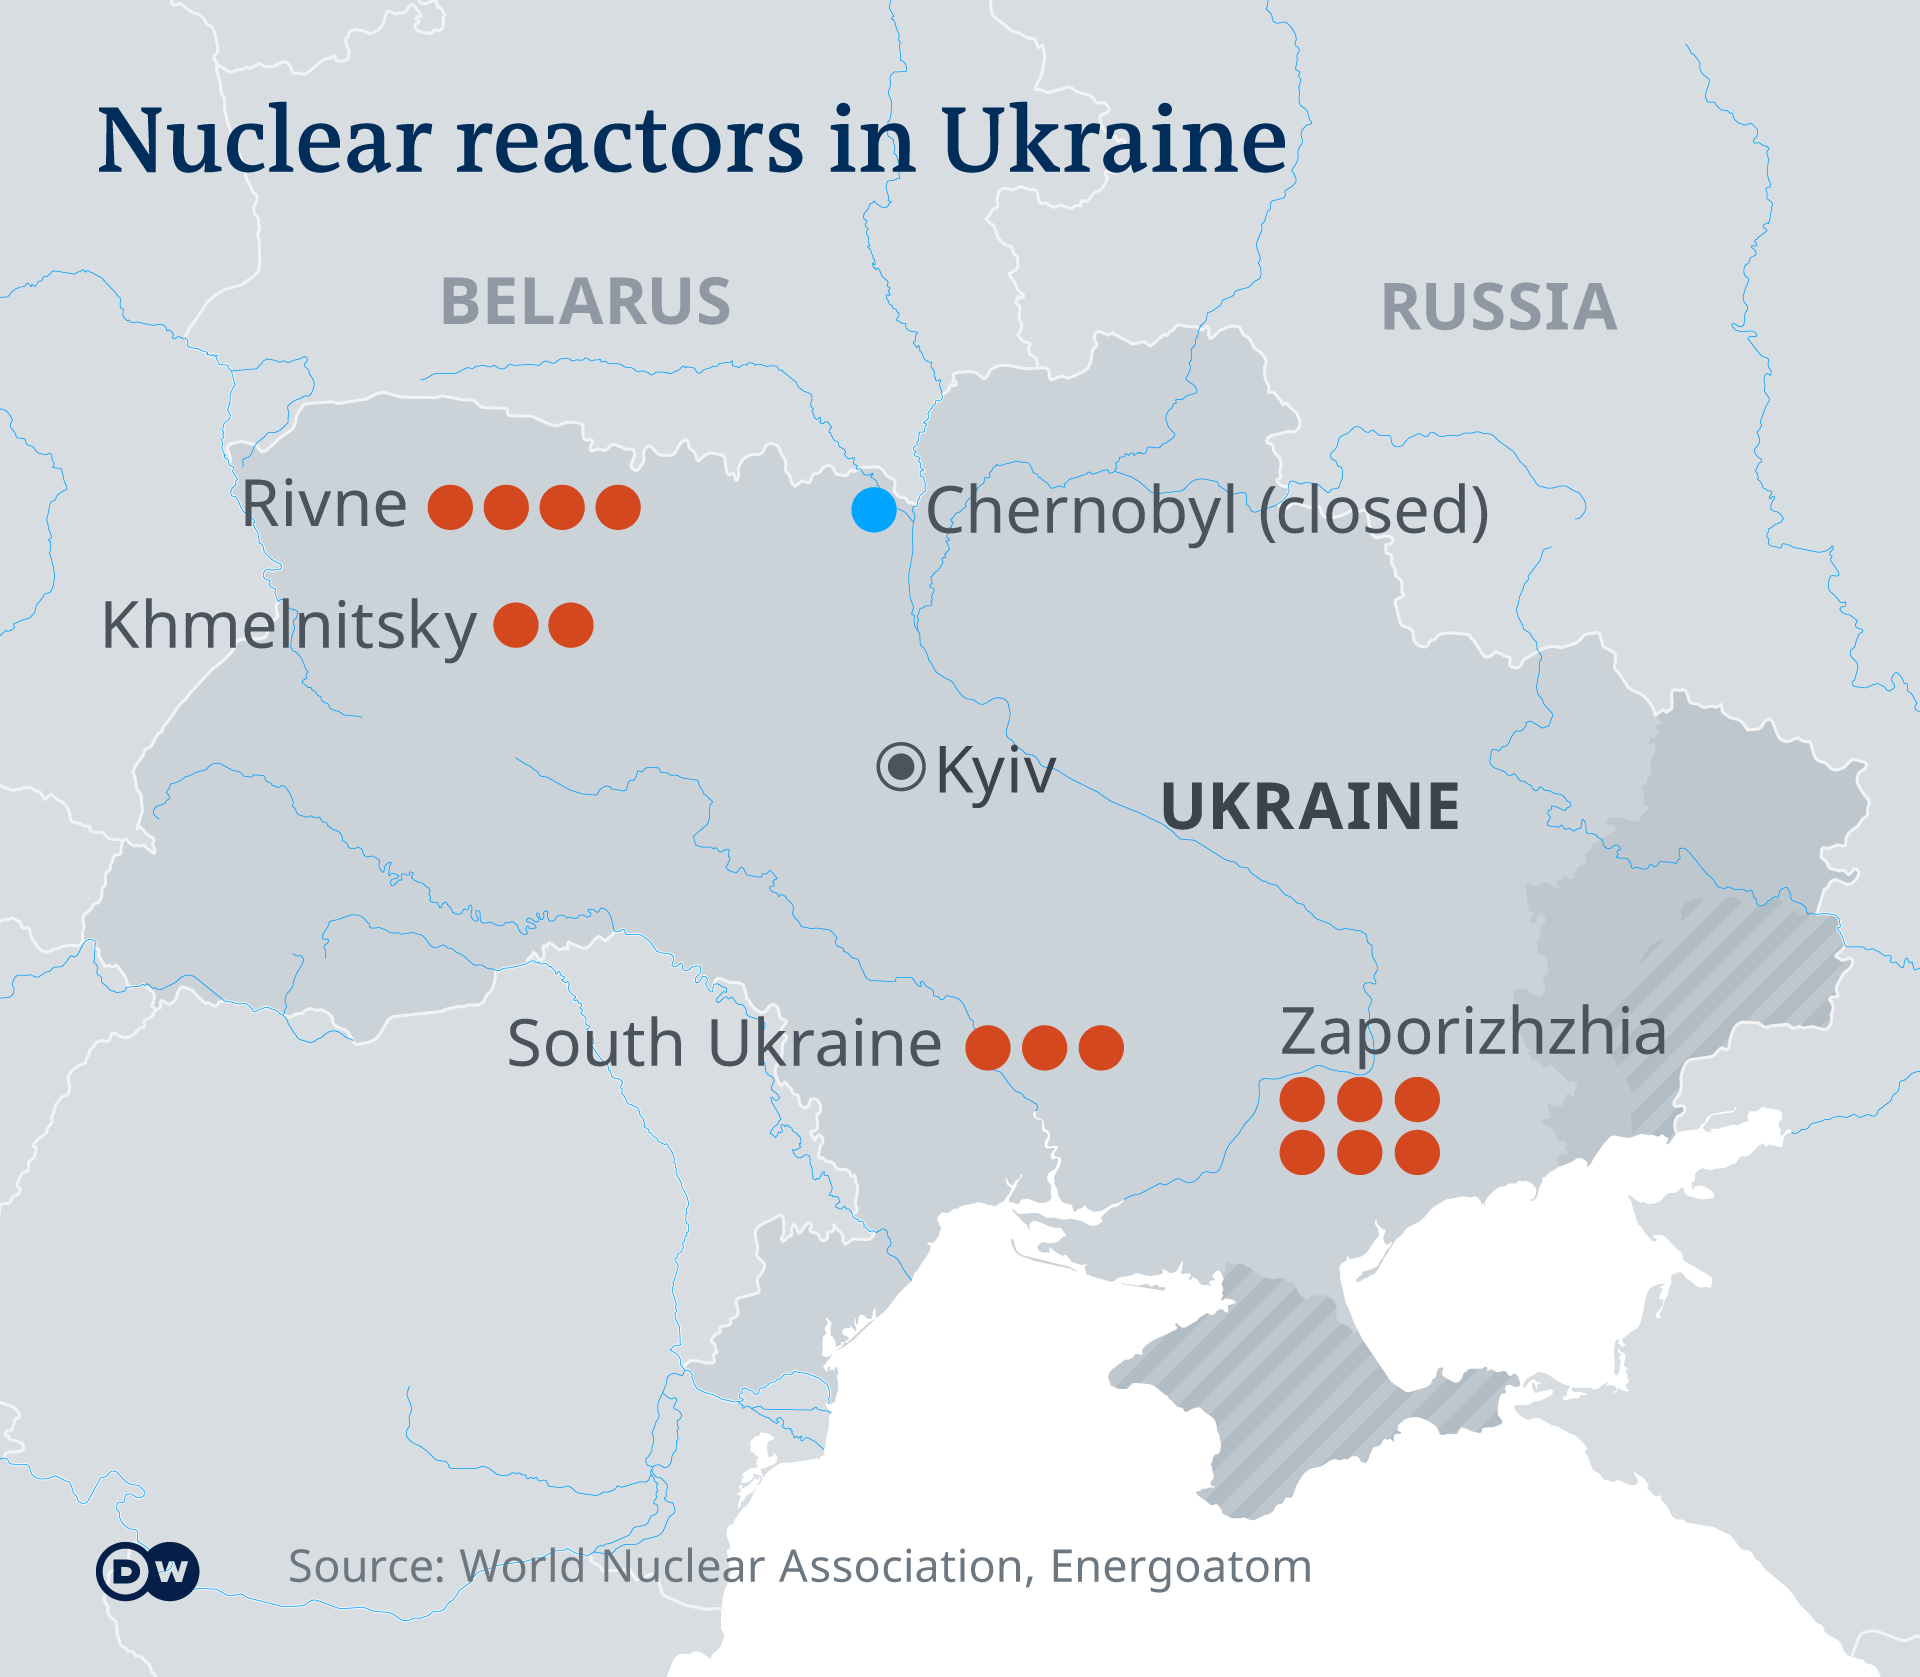 A map showing nuclear power plants in Ukraine